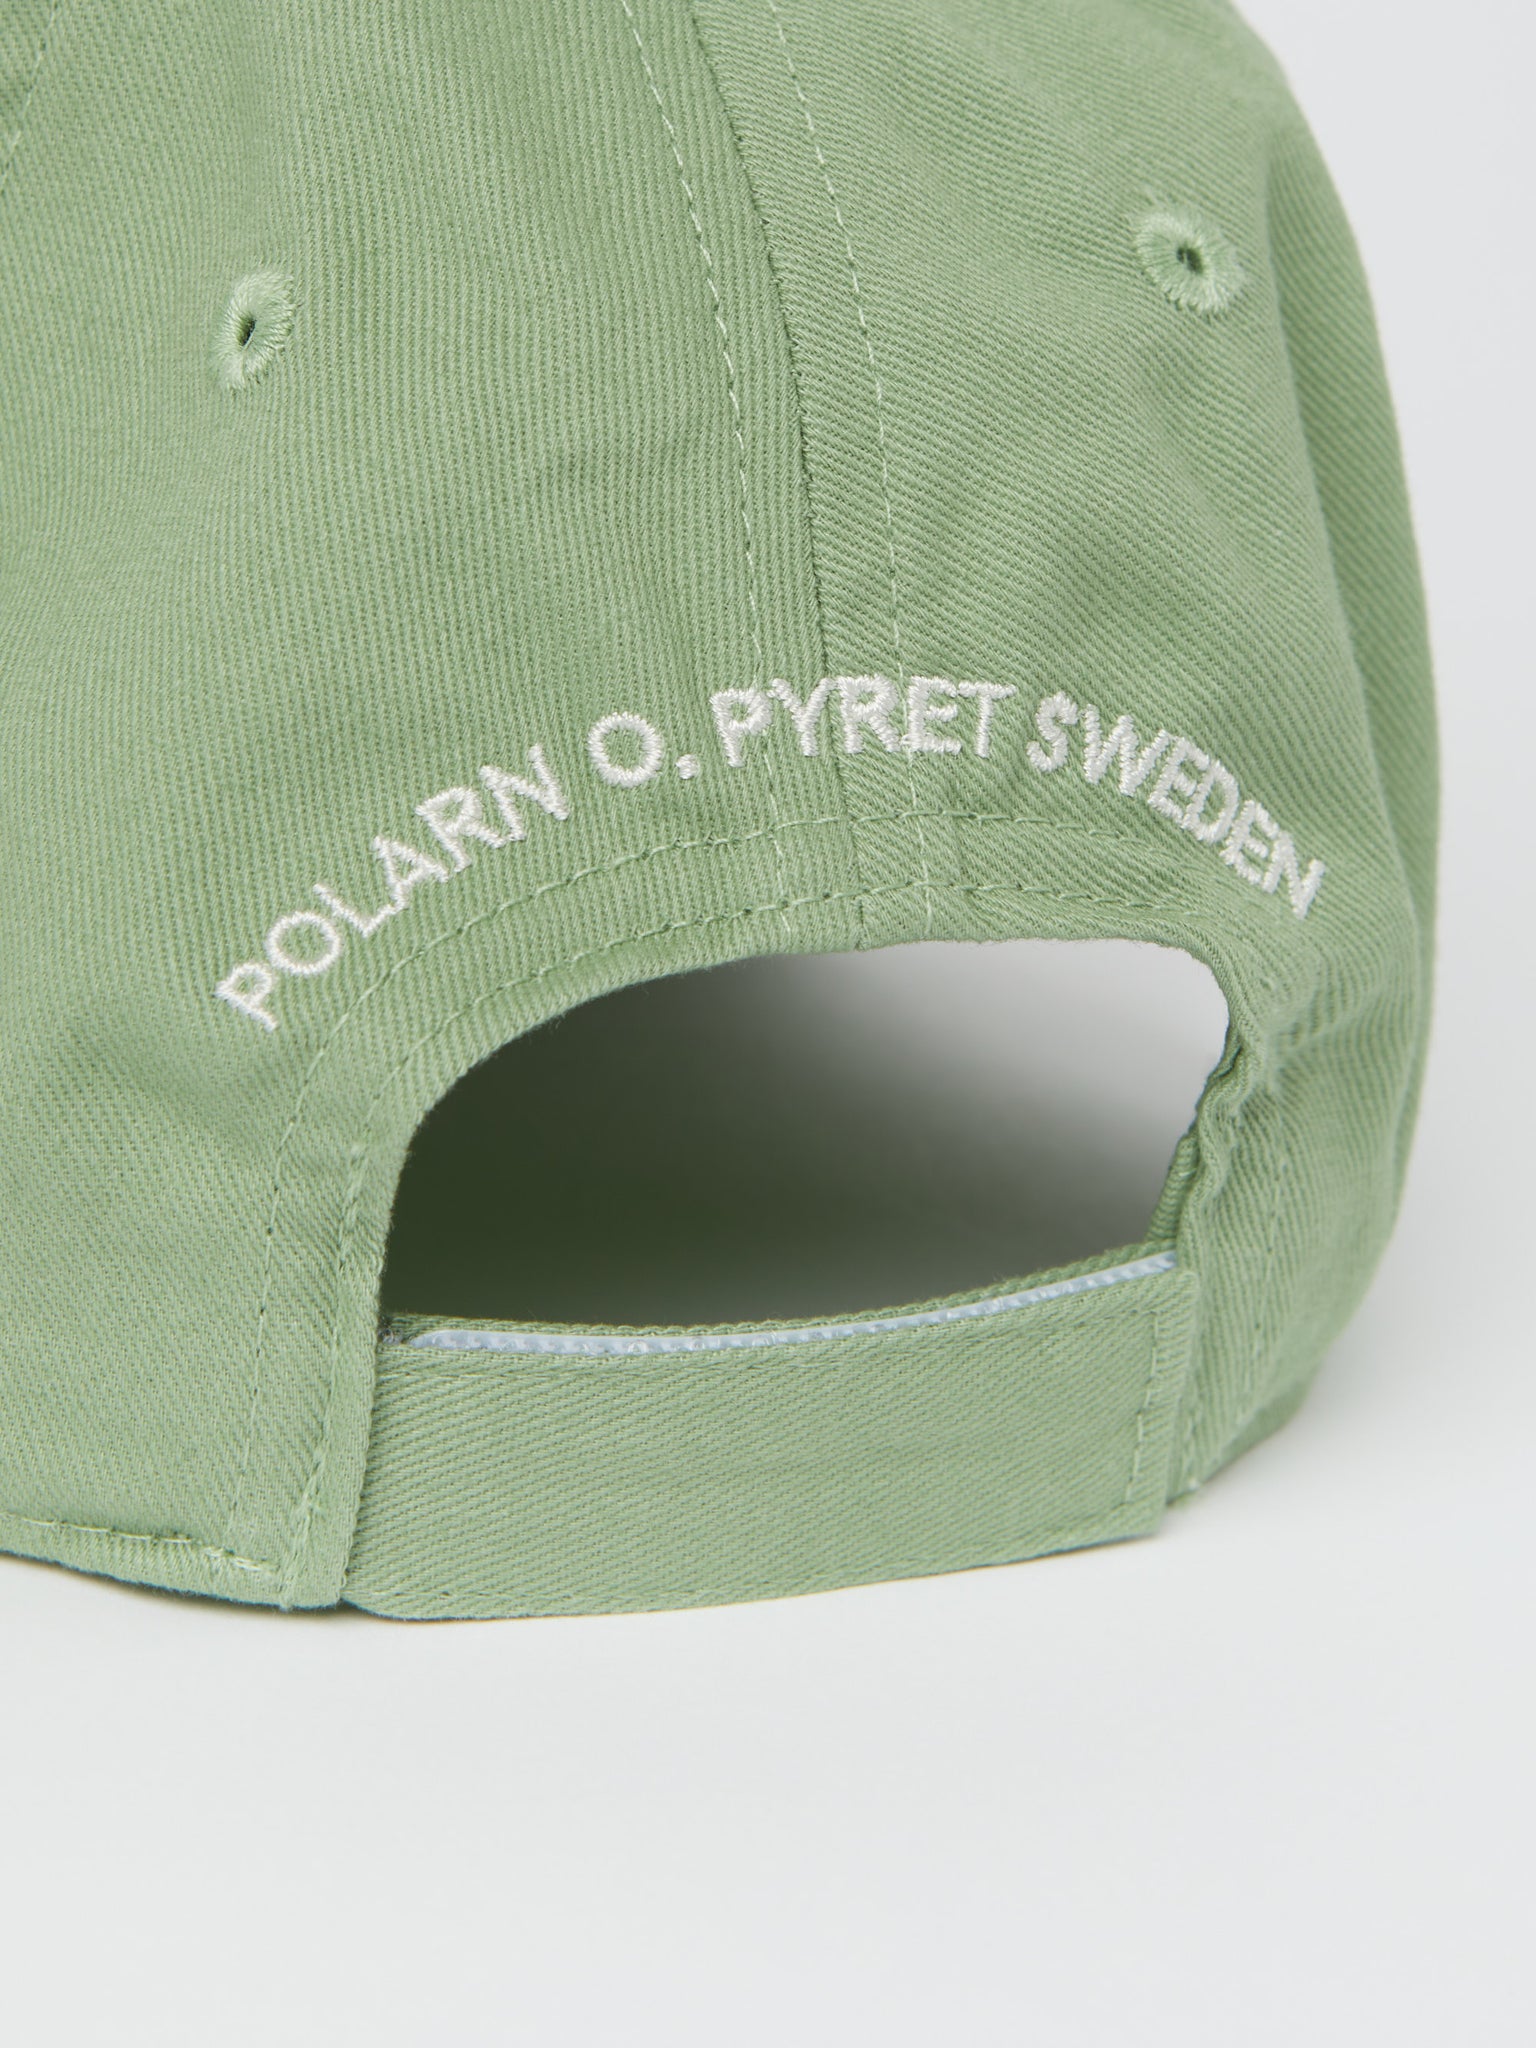 Kids Green Cotton Cap from the Polarn O. Pyret kidswear collection. Quality kids clothing made to last.